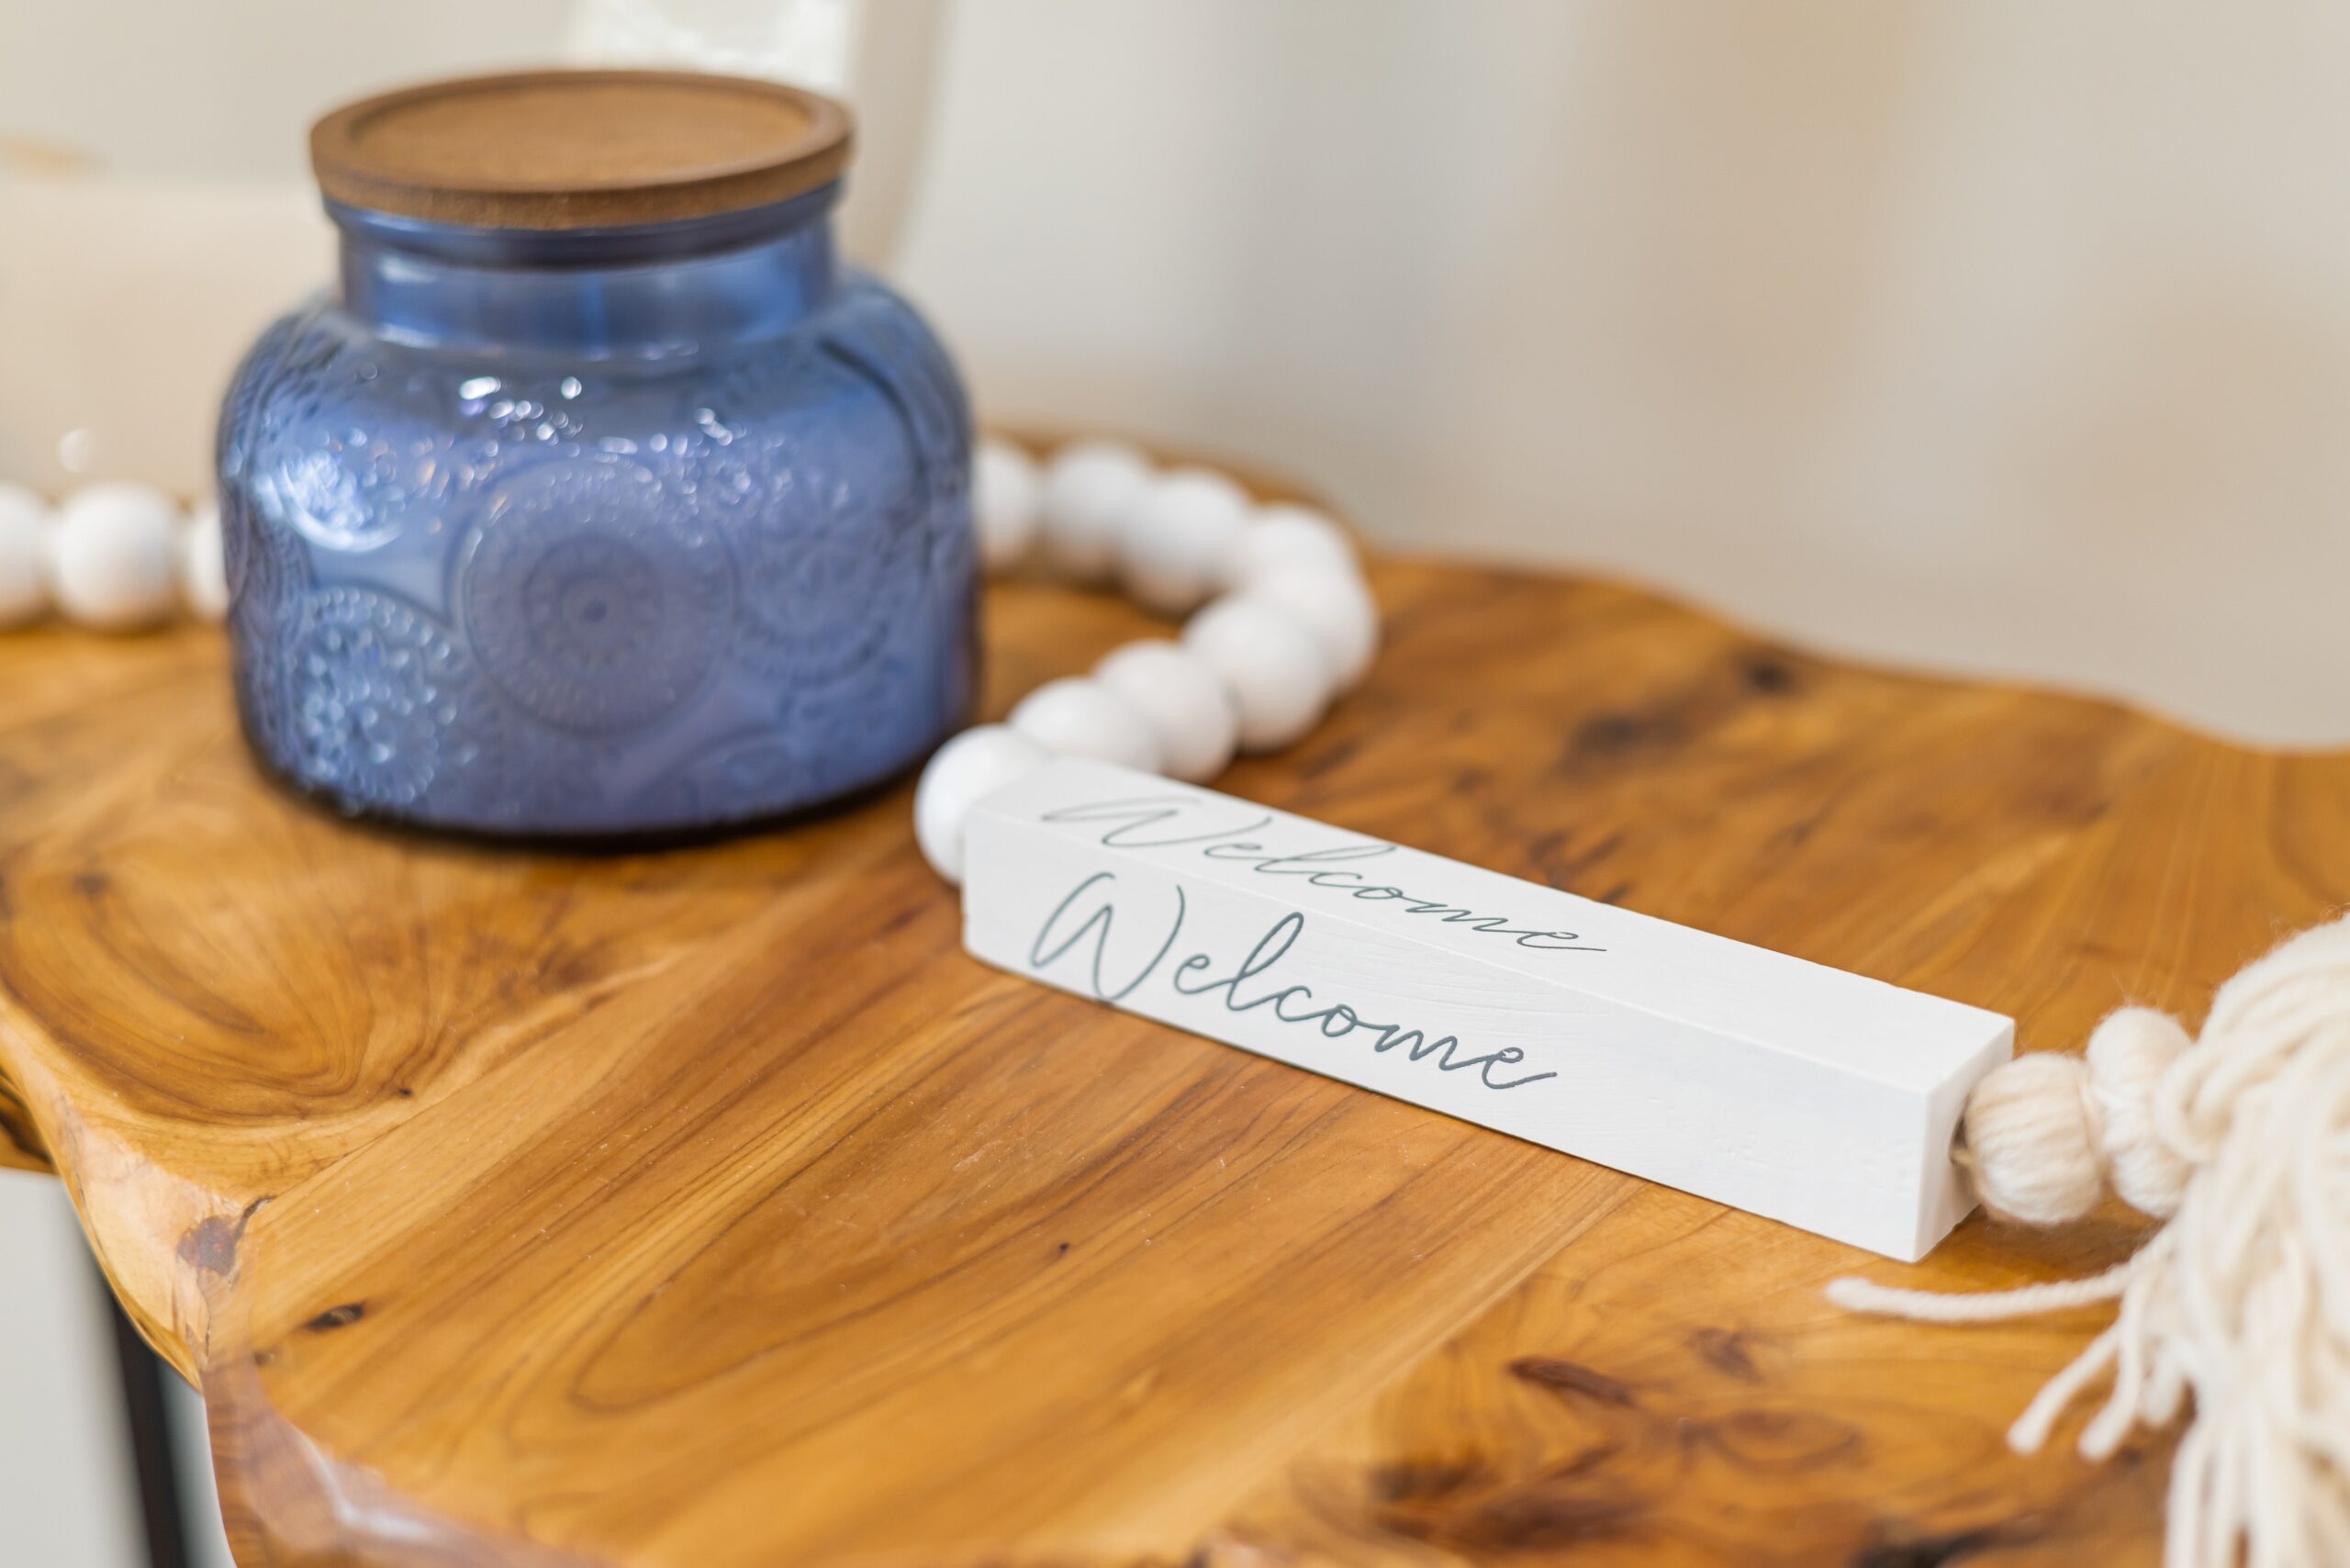 blue jar and welcome sign on a wooden table